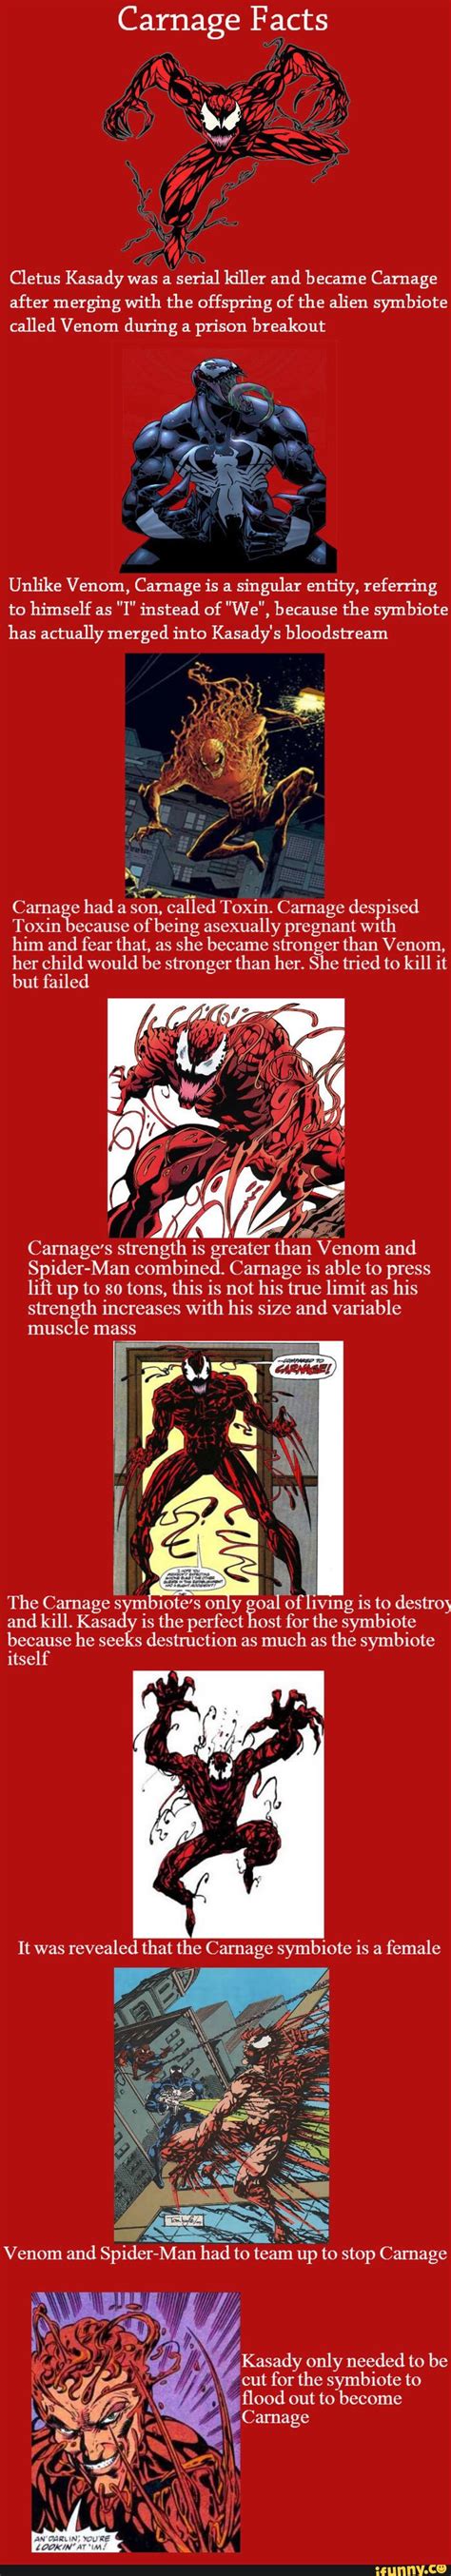 Carnage Facts Cletus Kasady Was A Serial Killer And Became Carnage